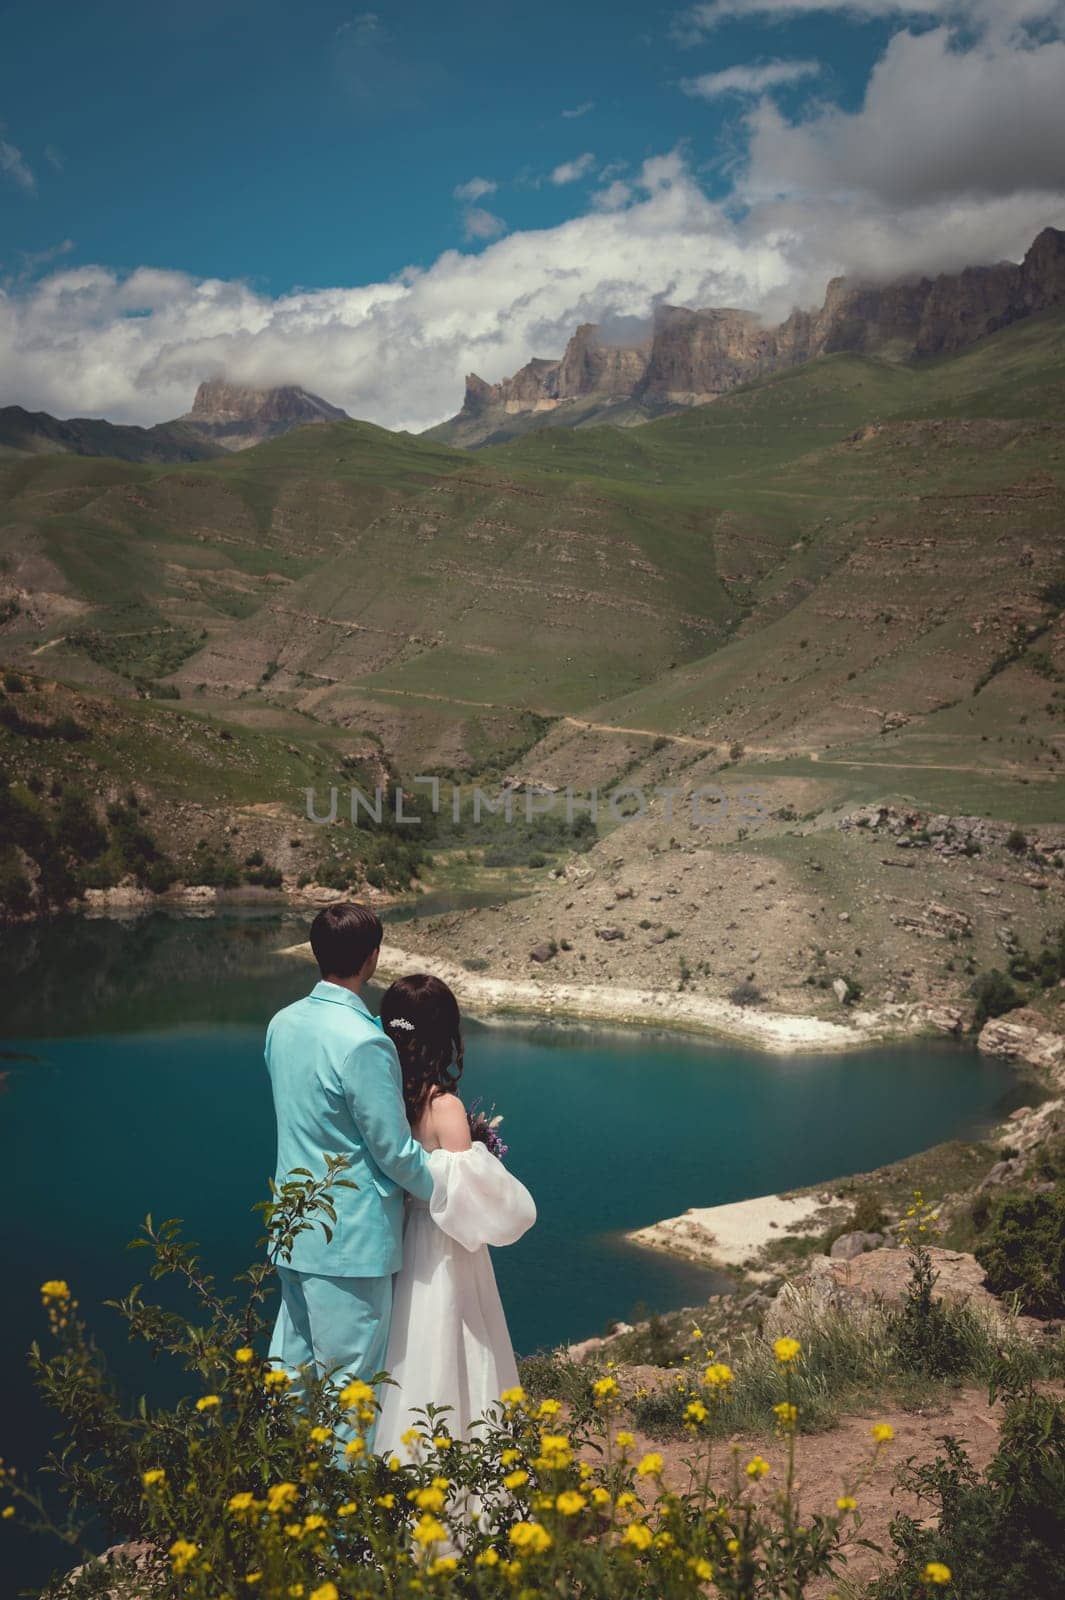 Bride and groom dressed elegant in their wedding gowns holding hands and hugging posing for their photo session in a desert like landscape by the lake by yanik88